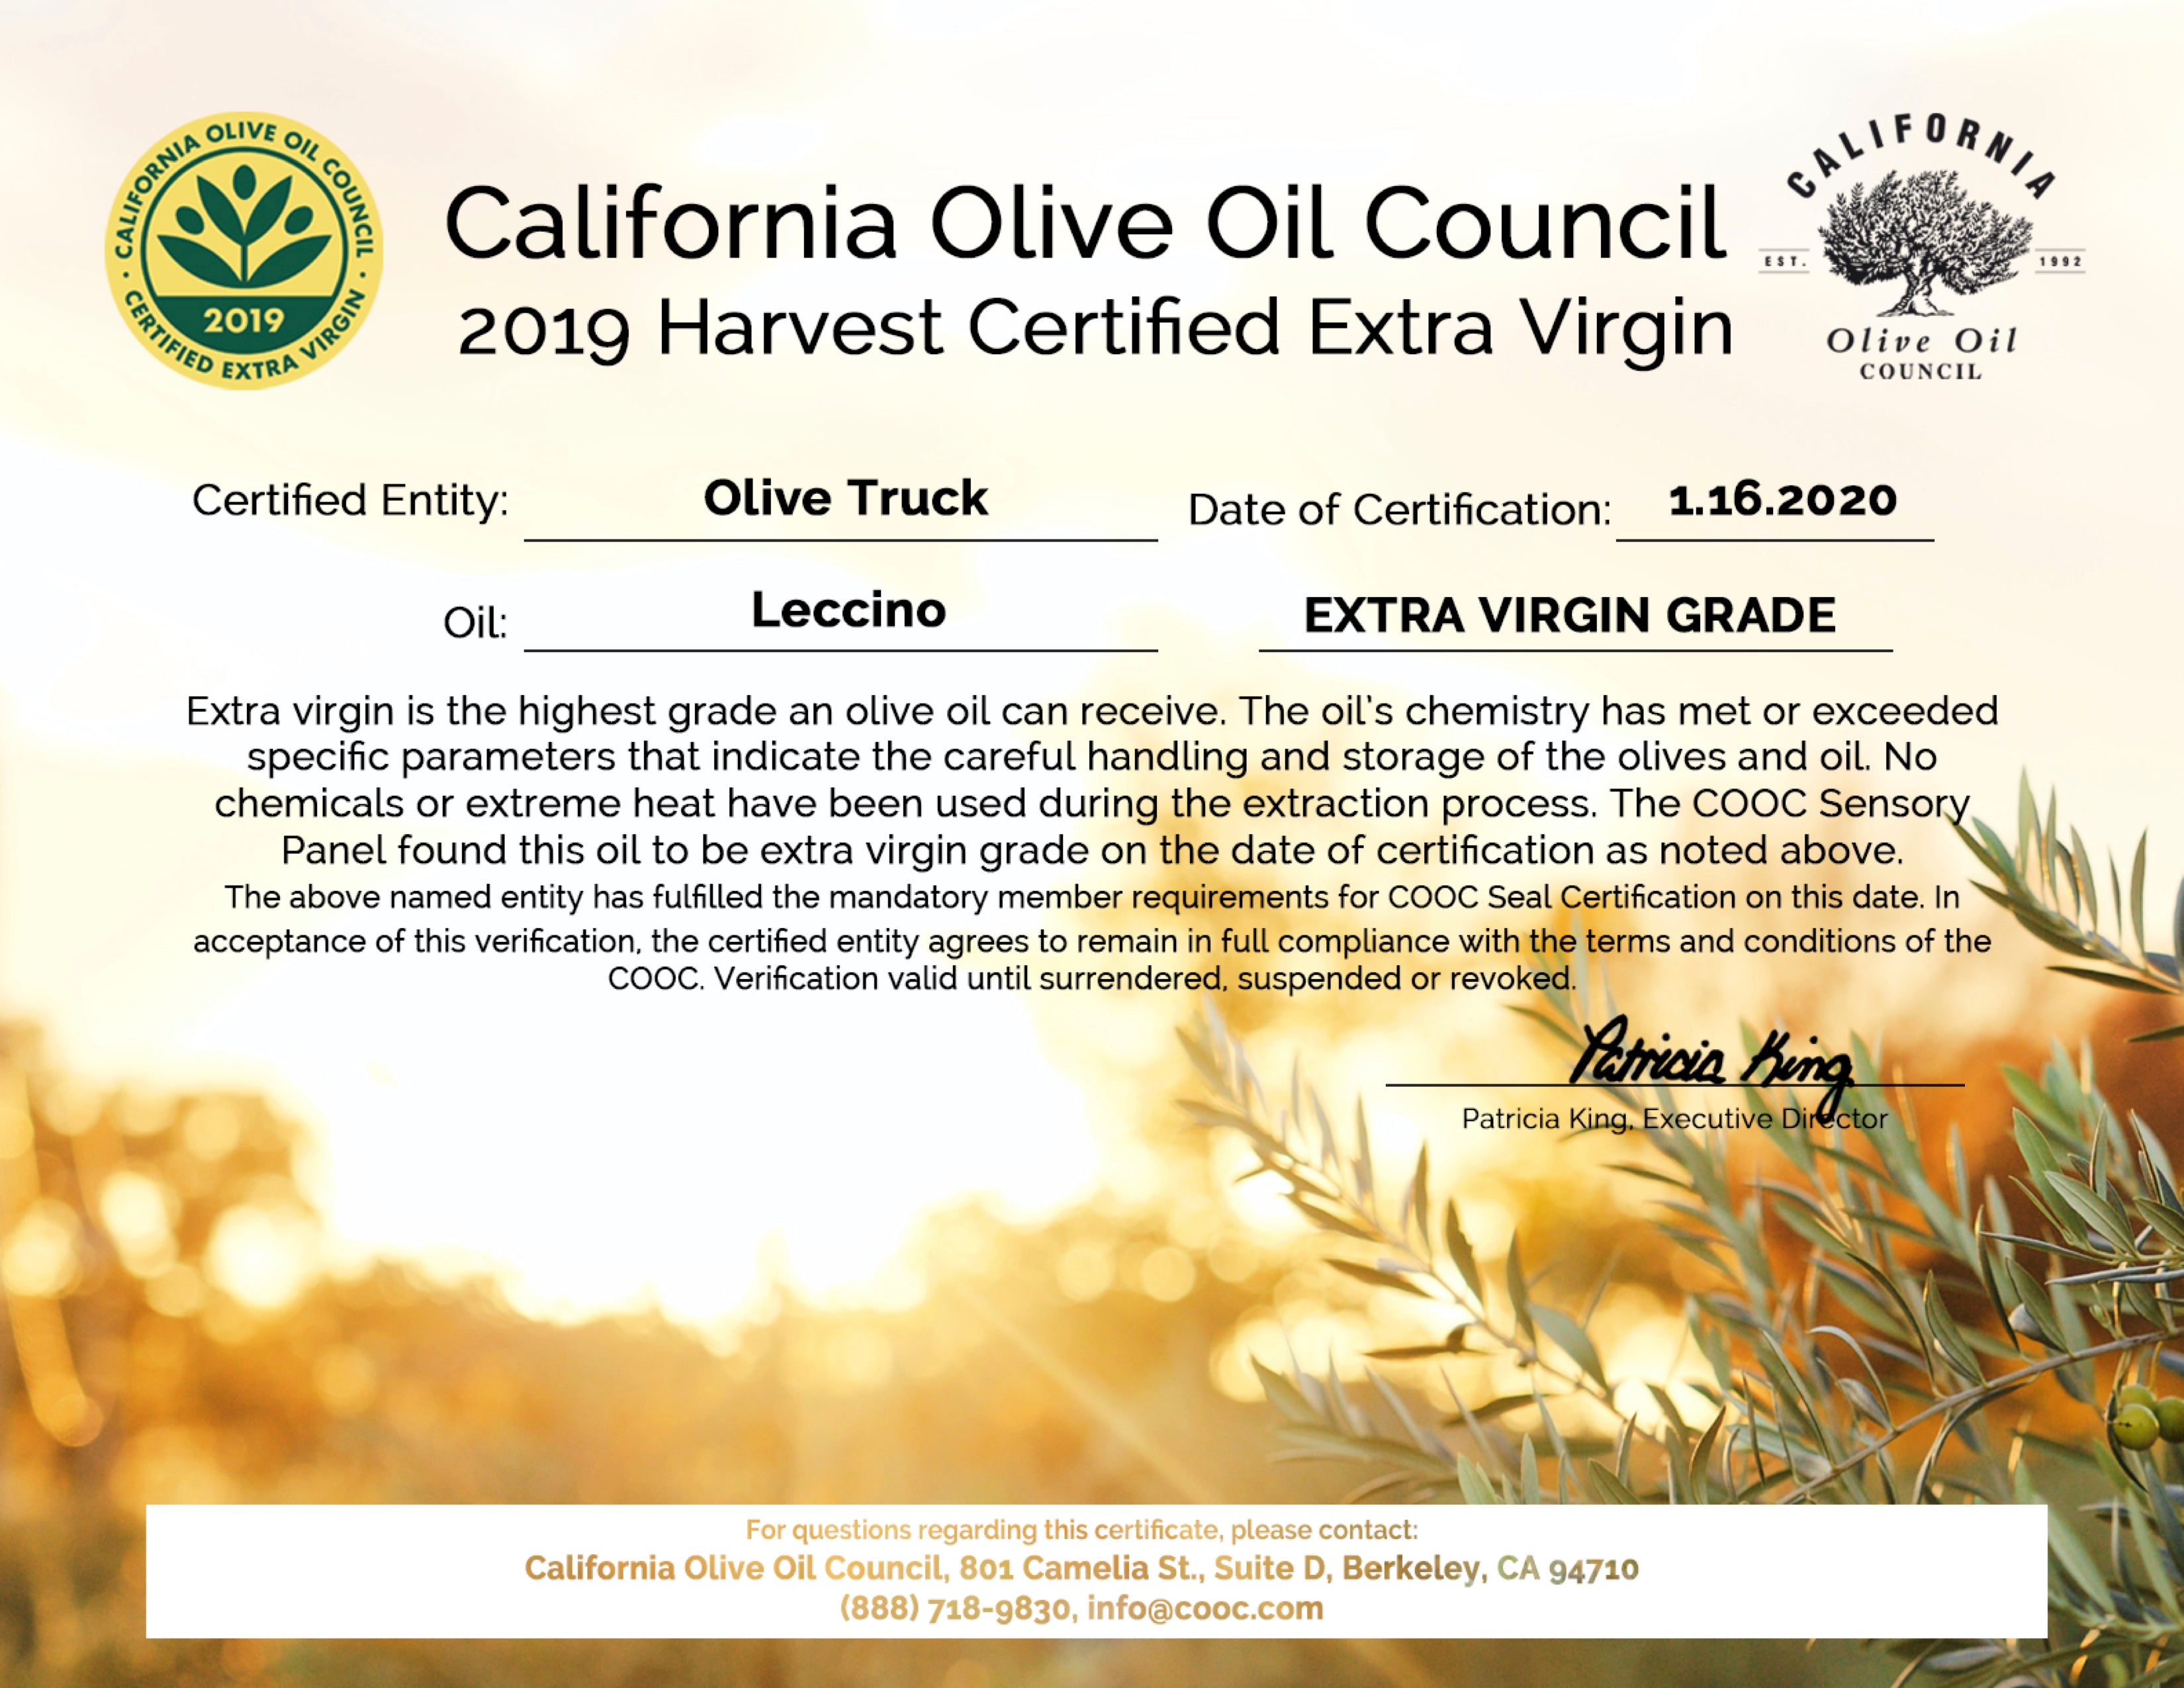 Leccino - California Olive Oil Council, 2019 Harvest Certified Extra Virgin